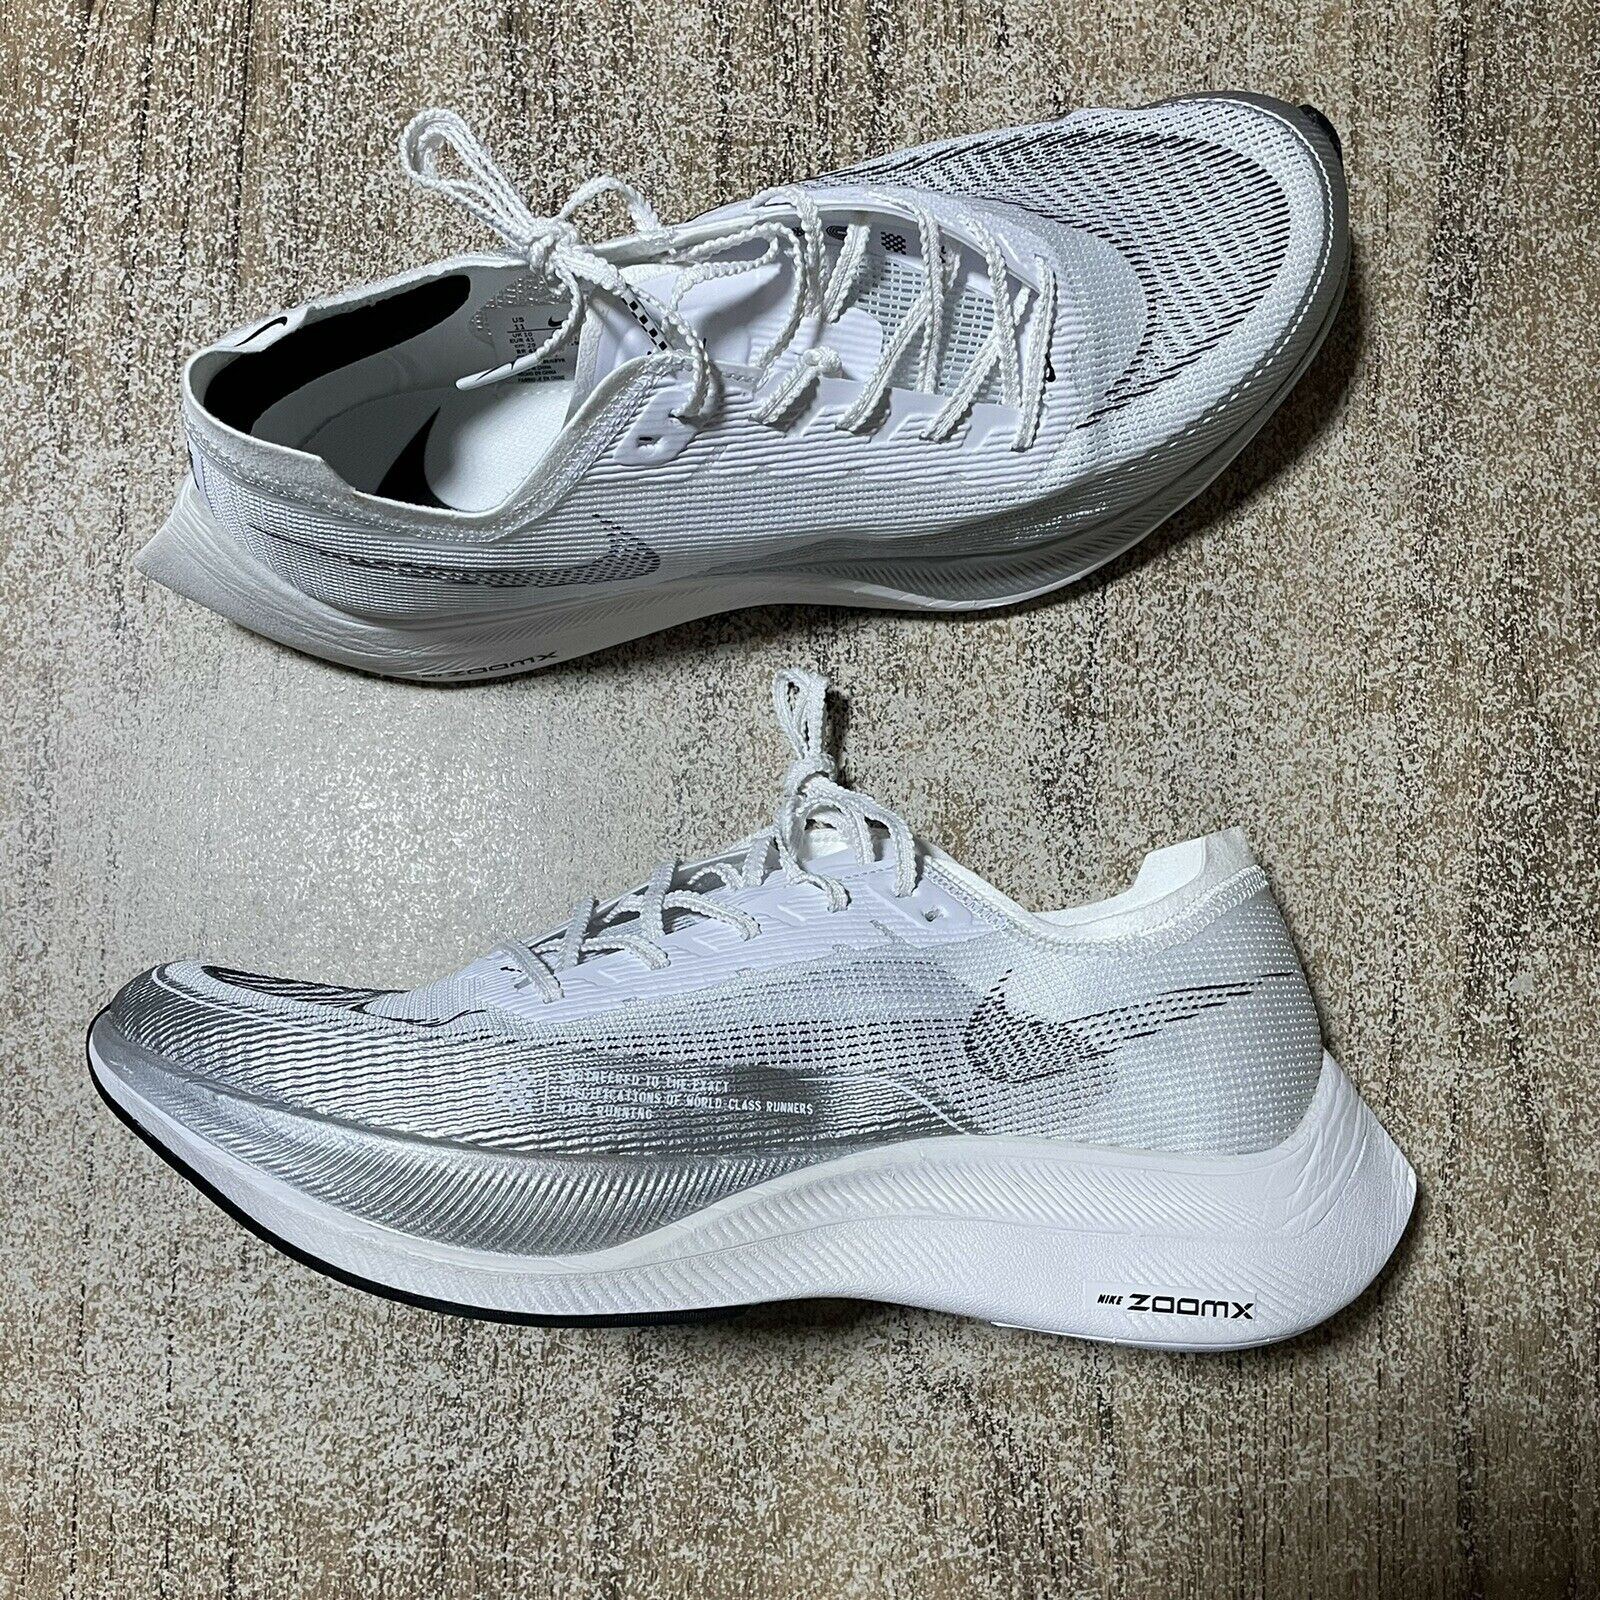 A785 Nike Zoom X Vaporfly Next% 2 CU4111-100 Mens Size 11 Running Shoes NEW